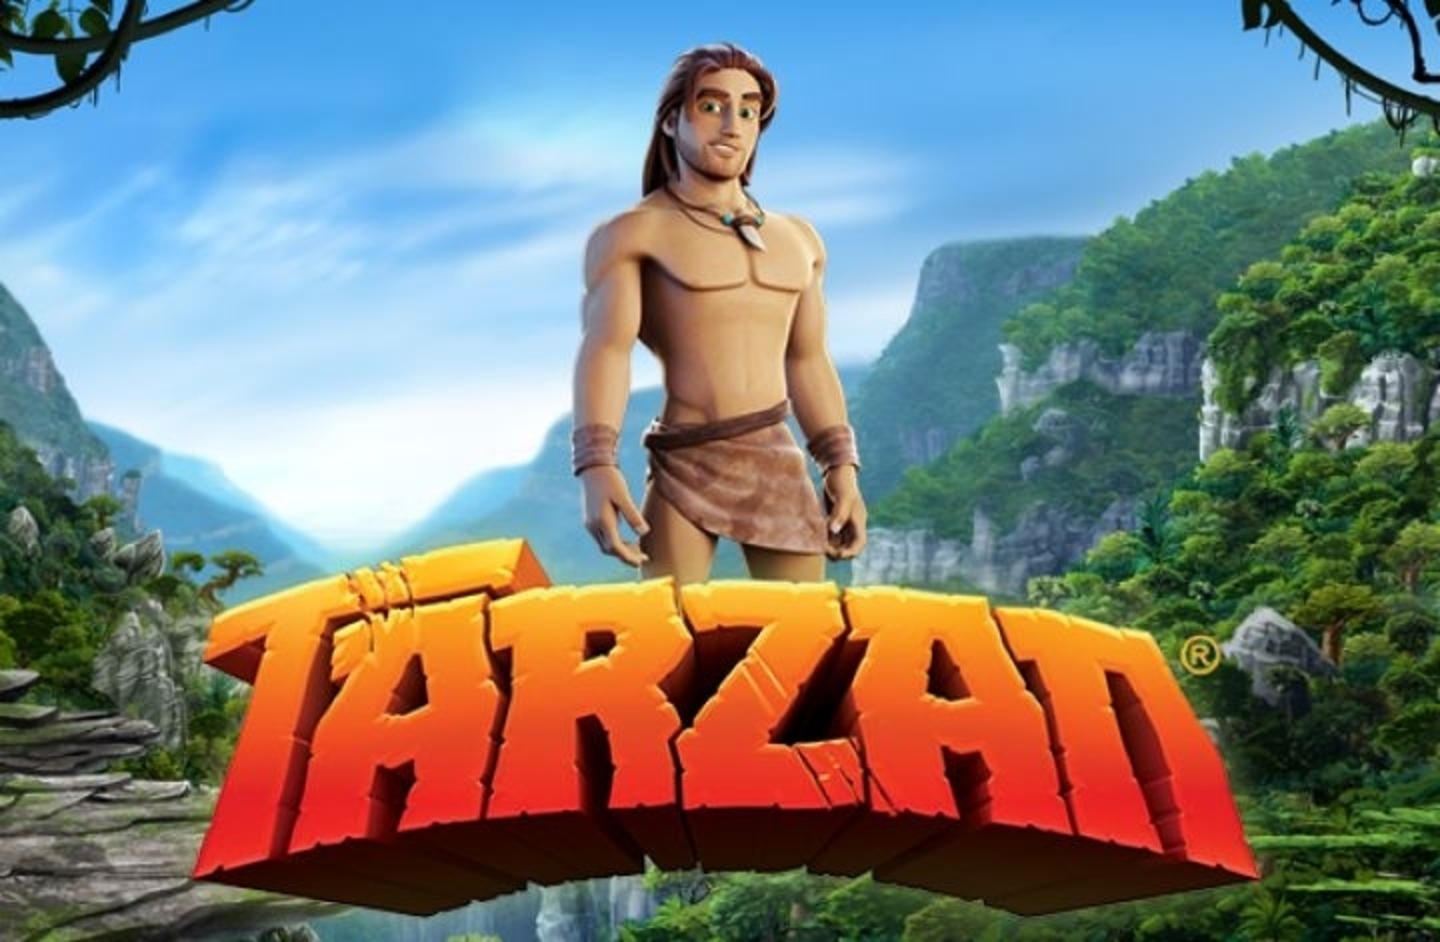 The Tarzan Online Slot Demo Game by Microgaming